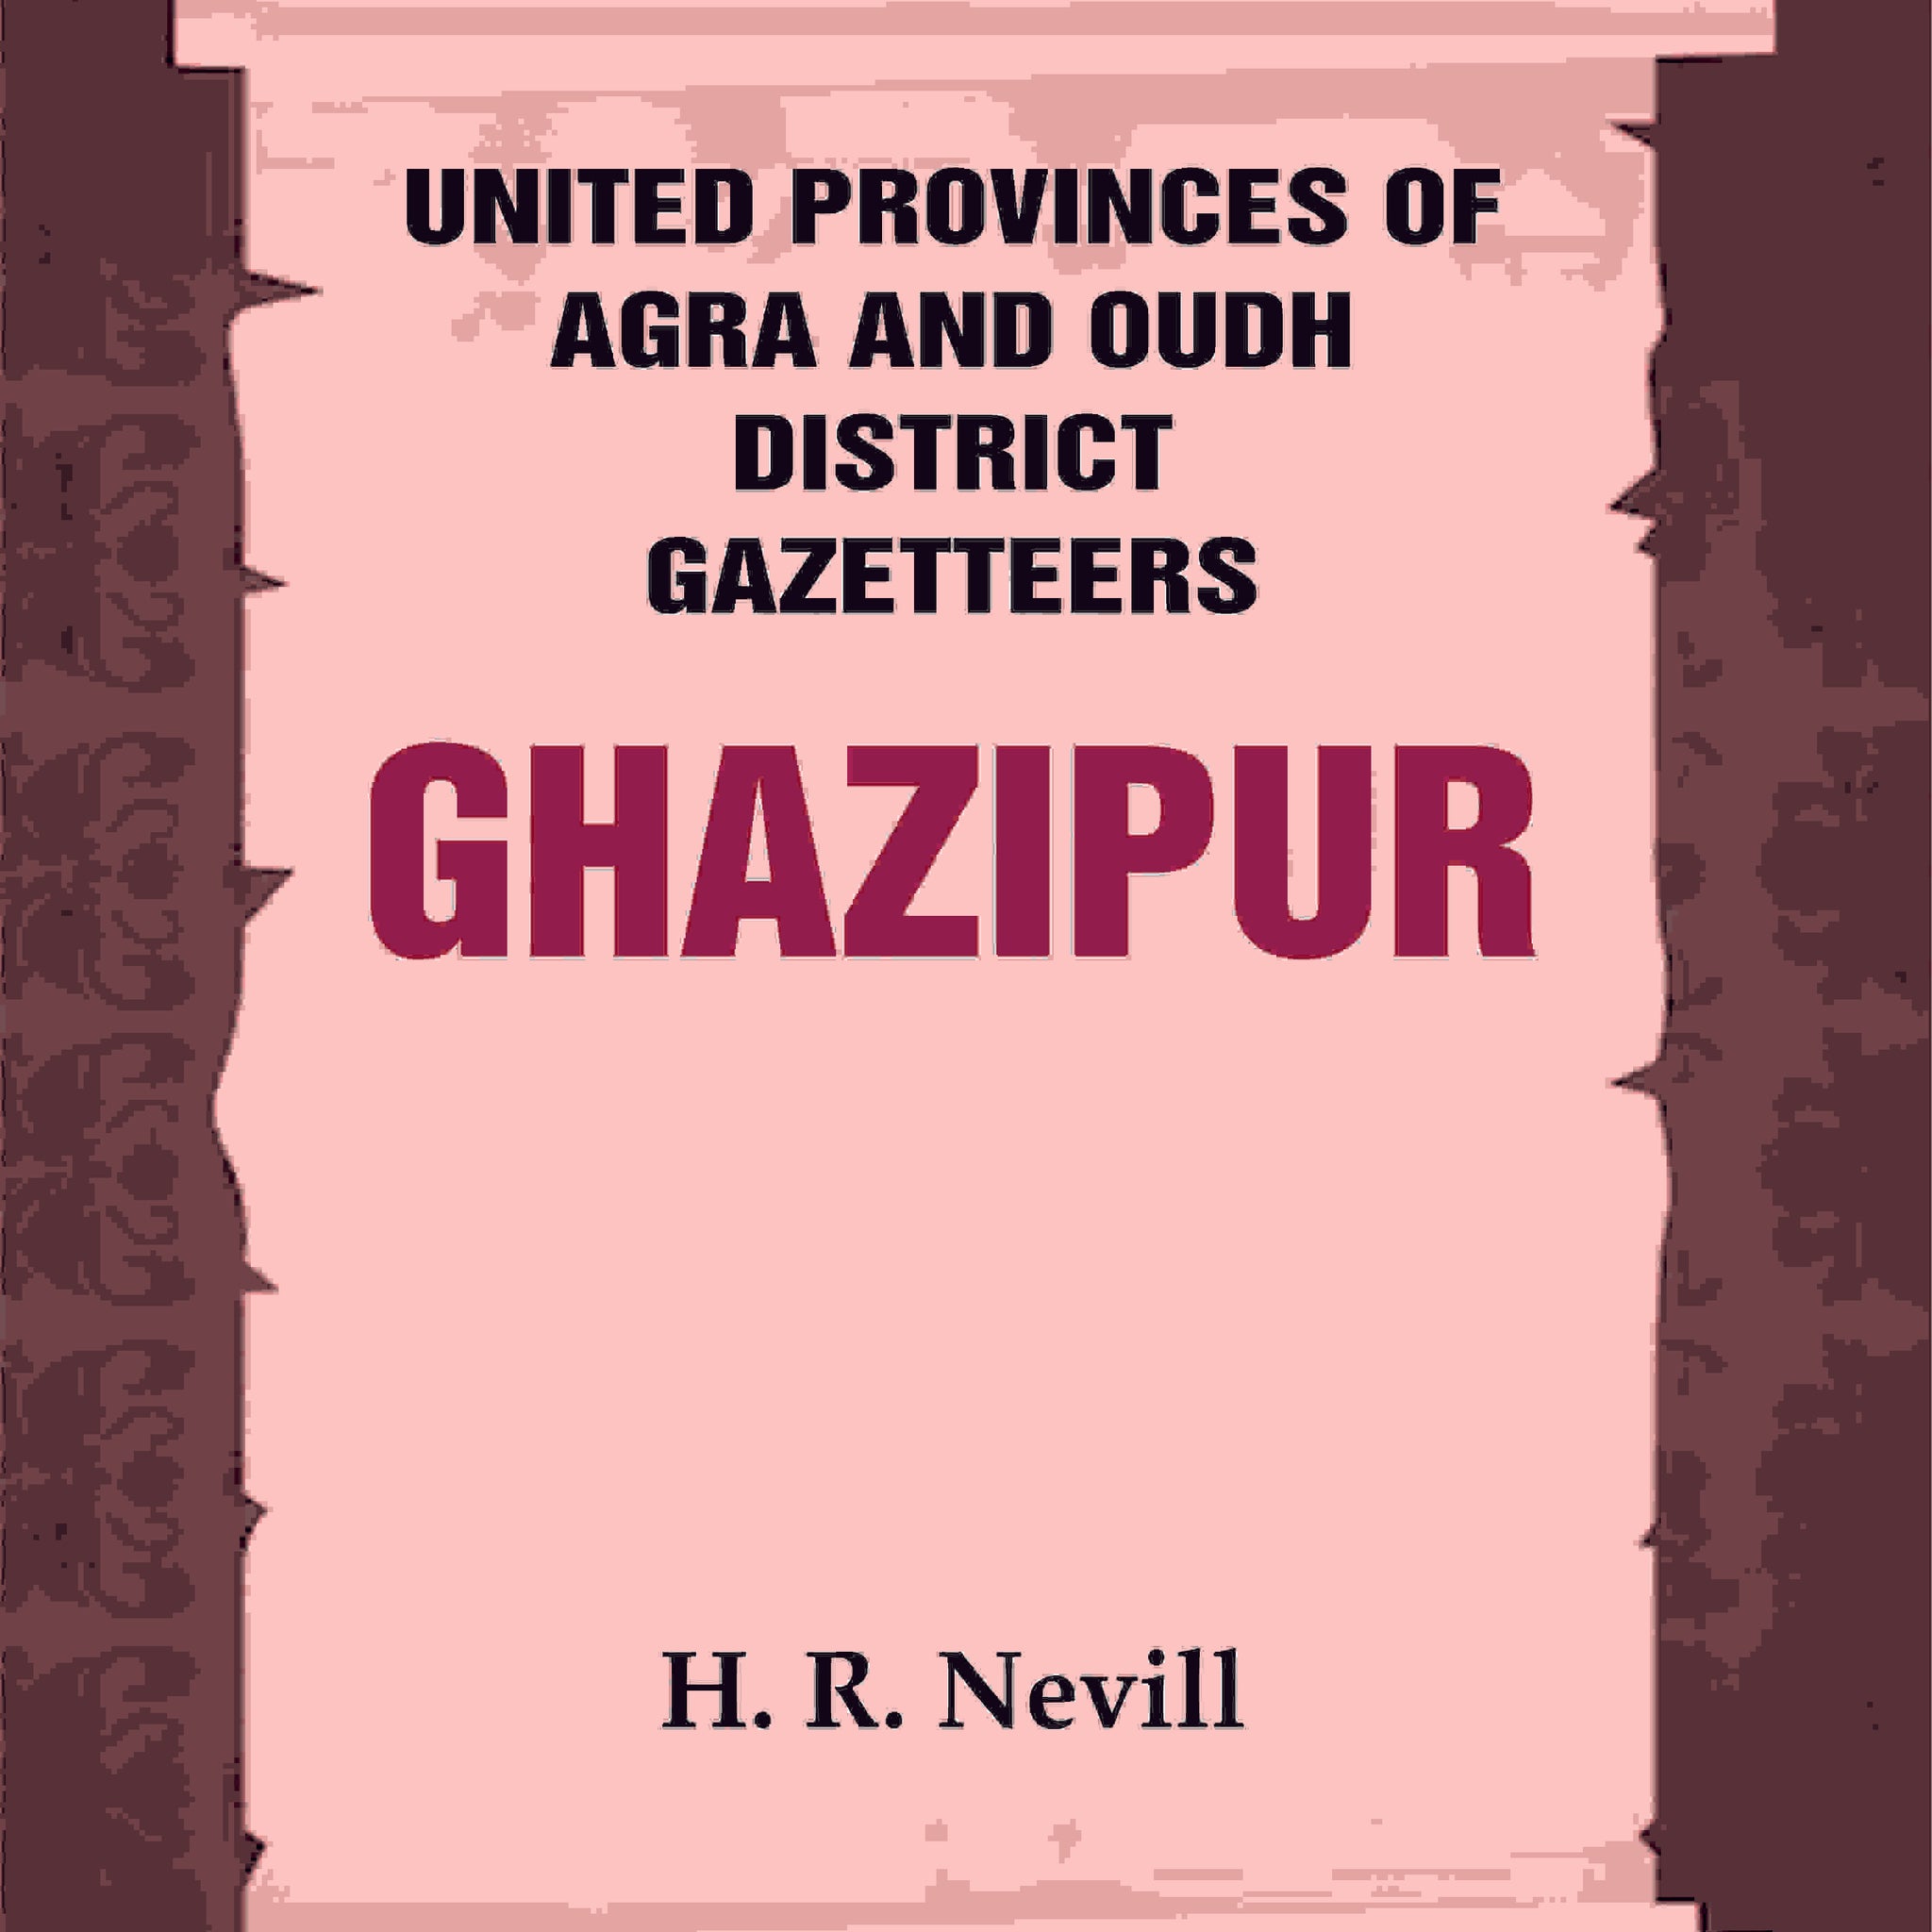 United Provinces of Agra and Oudh District Gazetteers: Ghazipur